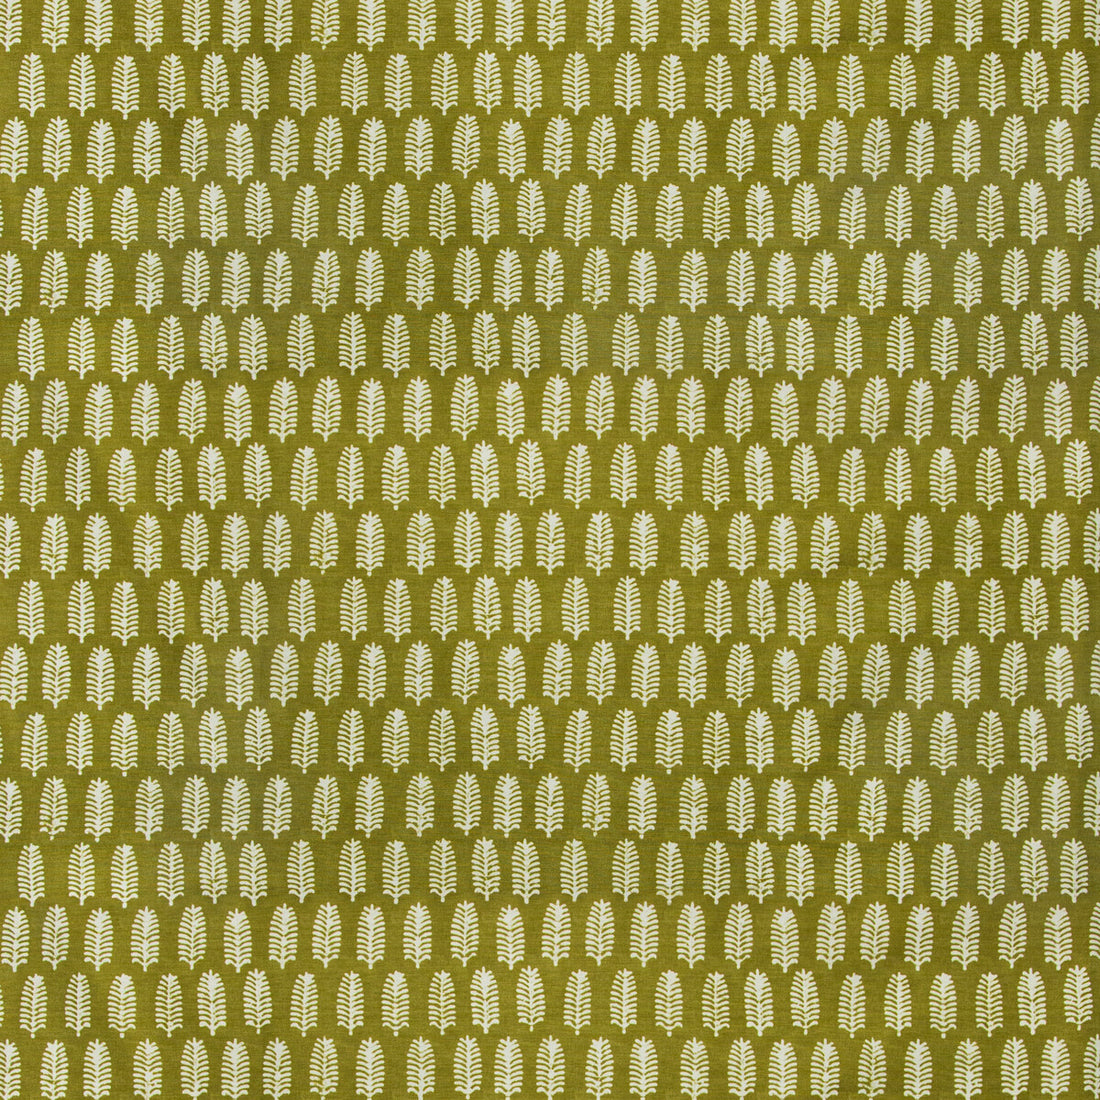 Palmier fabric in palm green color - pattern 2019127.301.0 - by Lee Jofa